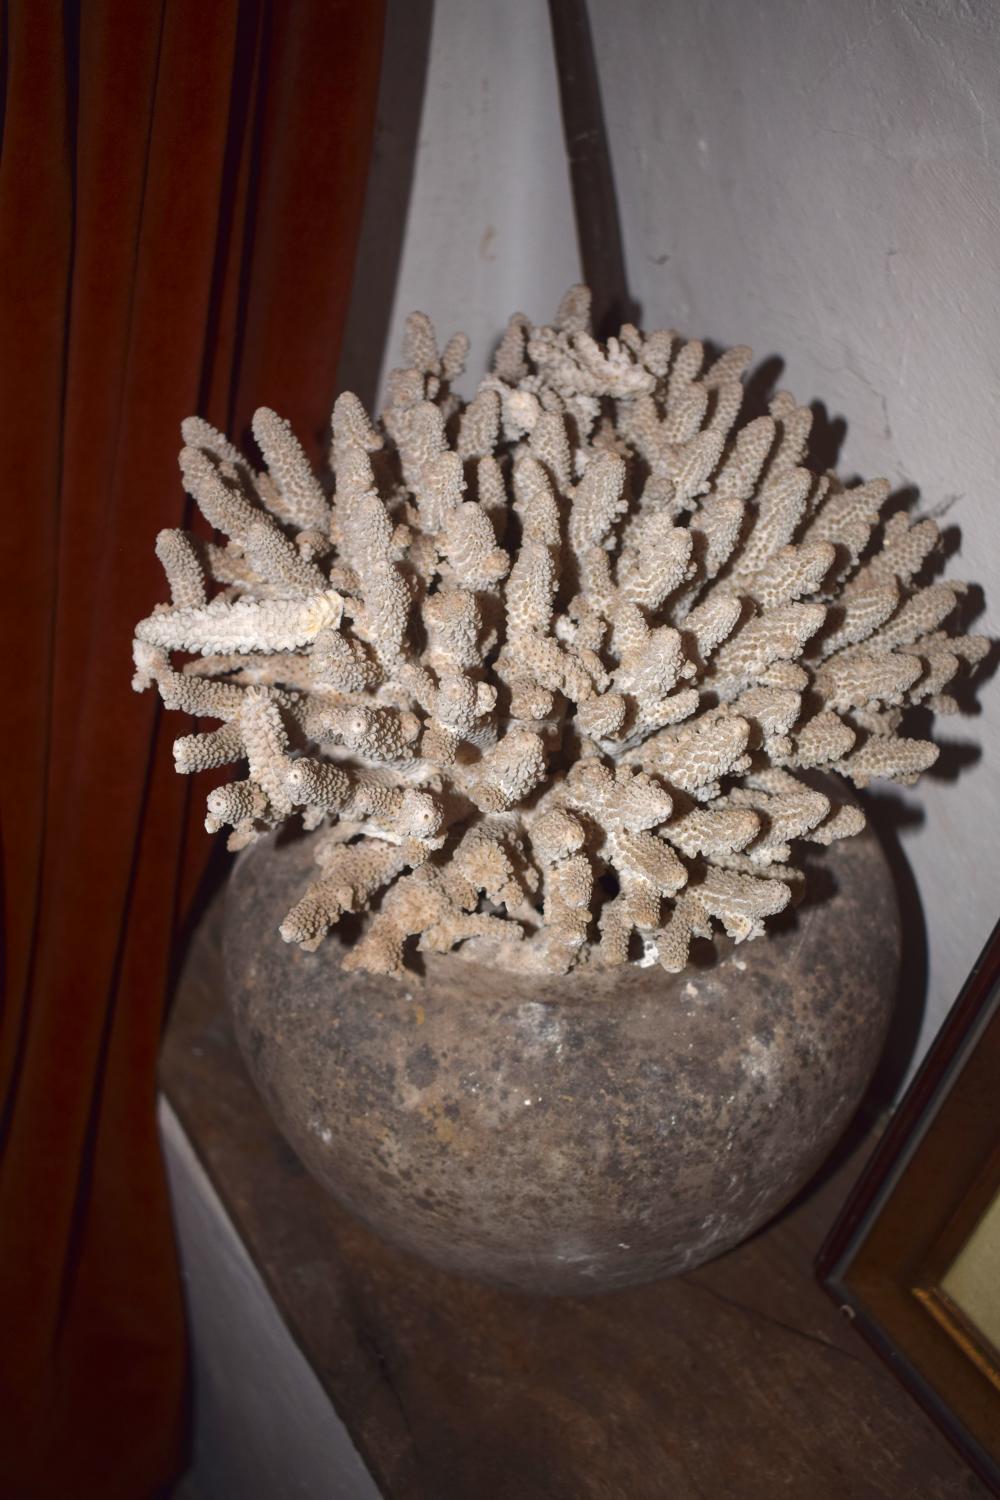 A large piece of coral